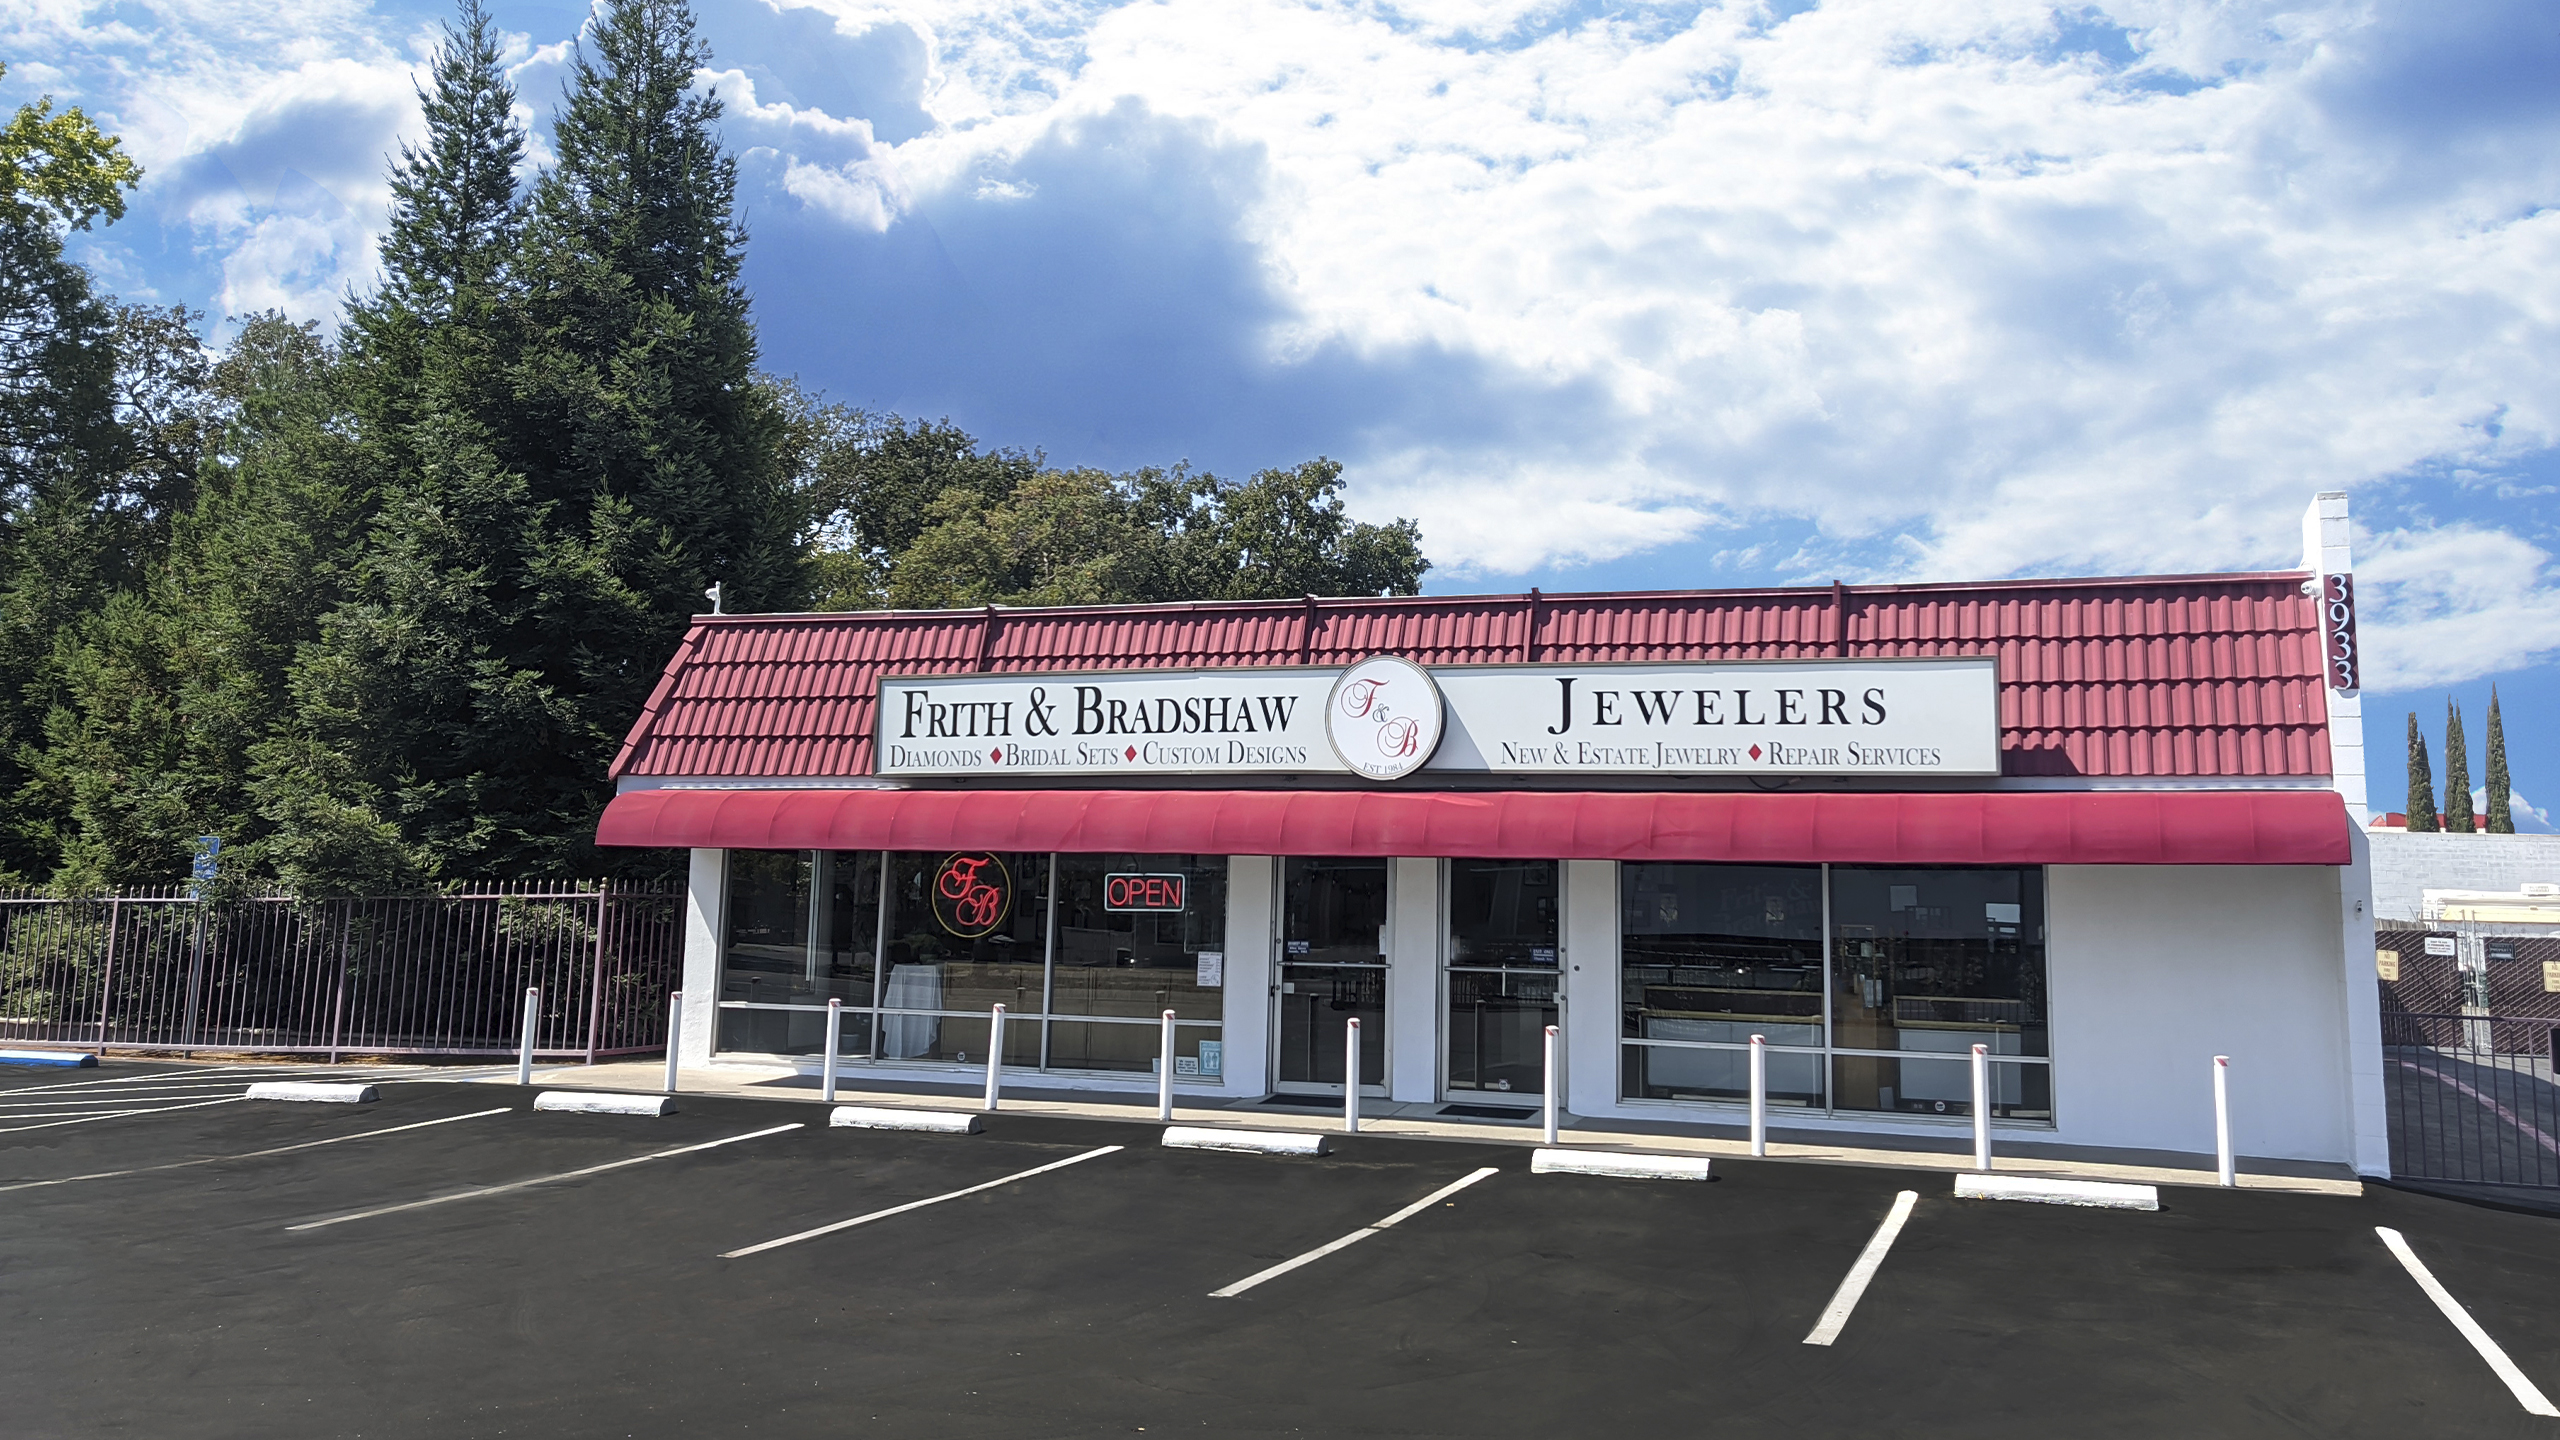 Frith and Bradshaw Jewelers storefront